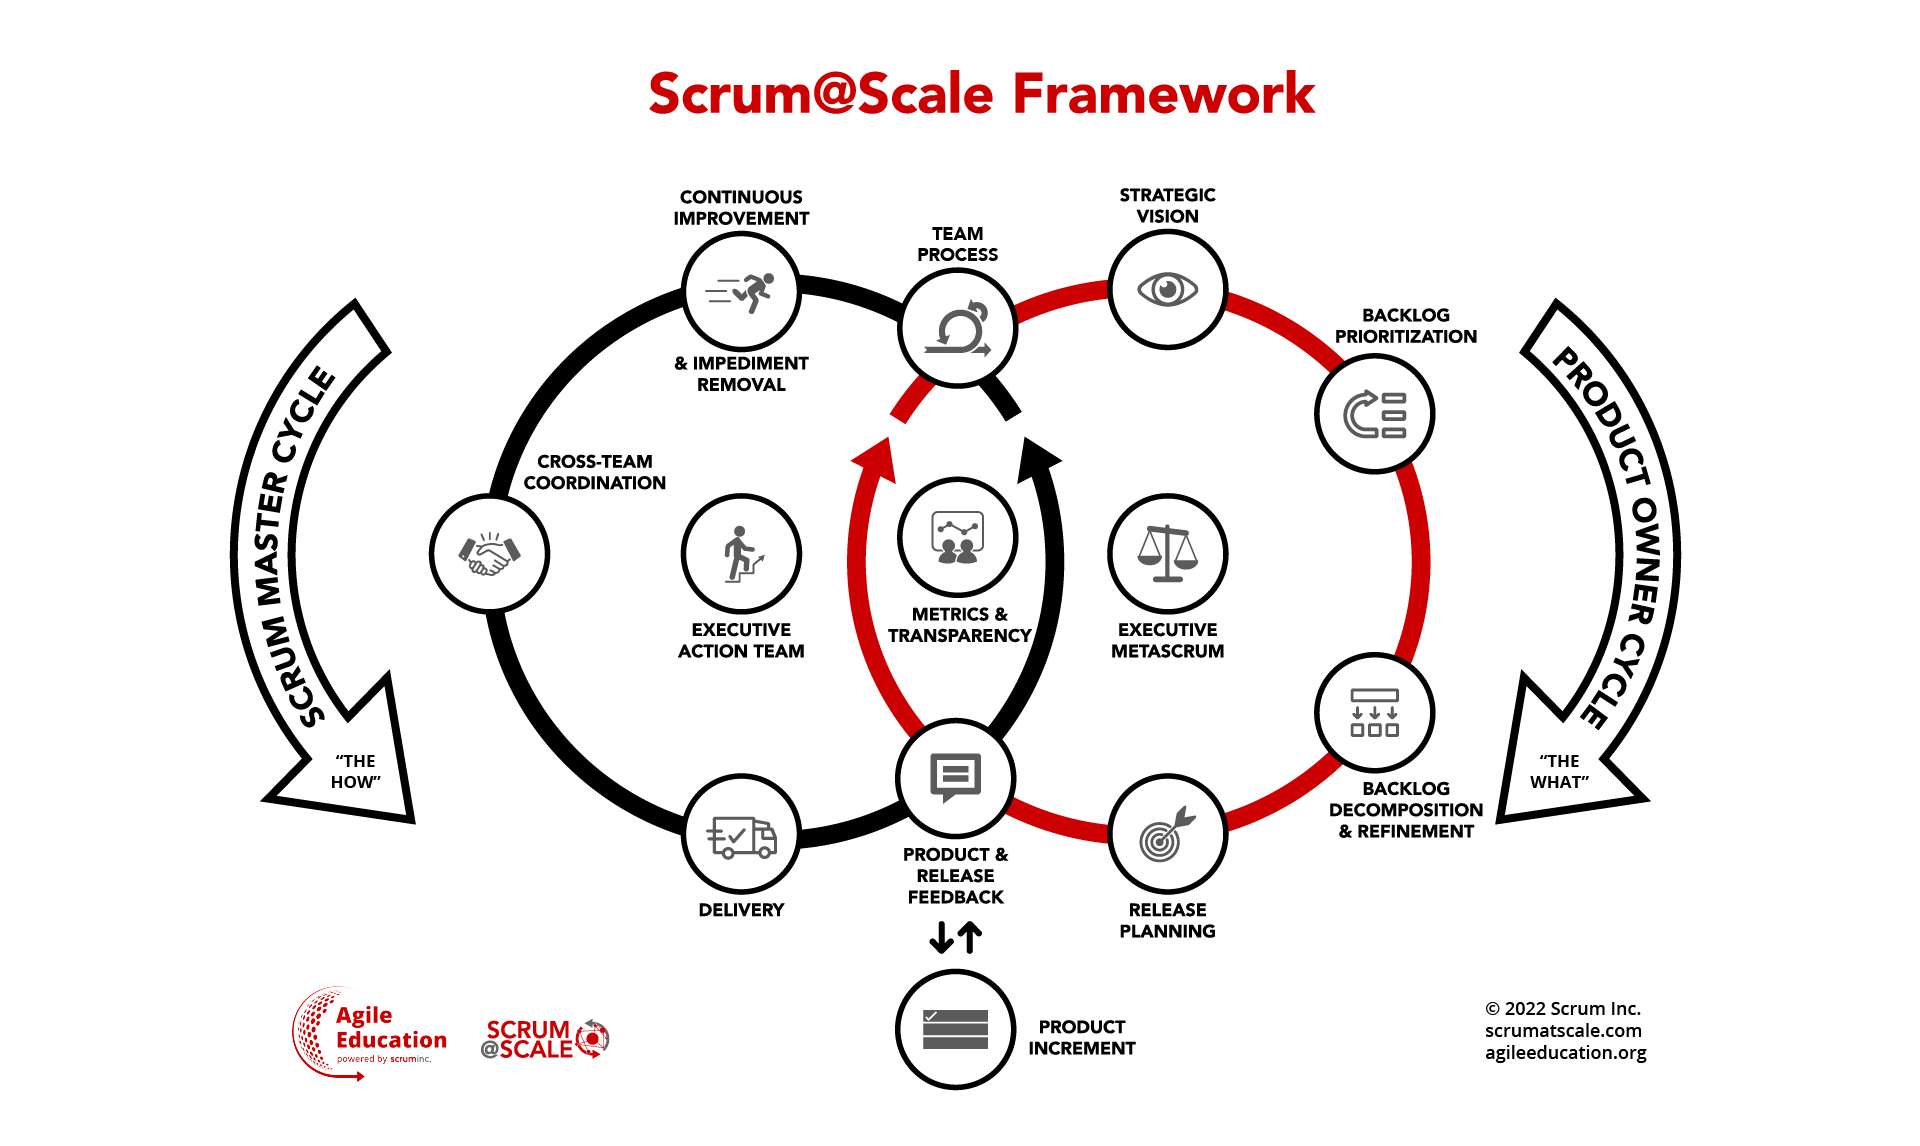 Scaling in Scrum with Scrum@Scale (S@S) Overview